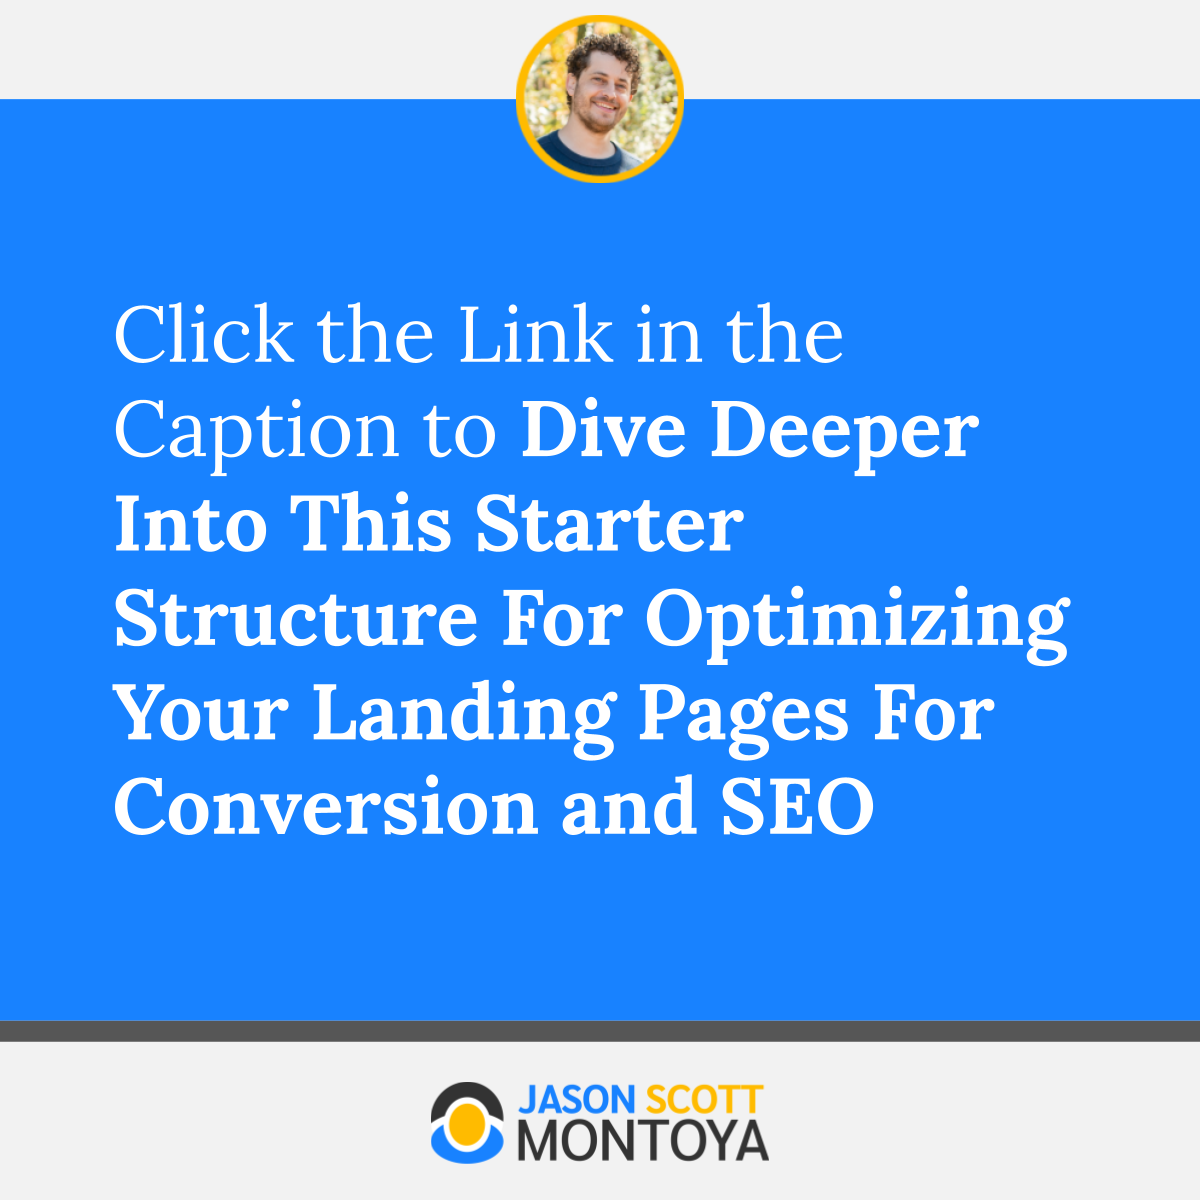 Click the Link in the Caption to Dive Deeper Into This Starter Structure For Optimizing Your Landing Pages For Conversion and SEO